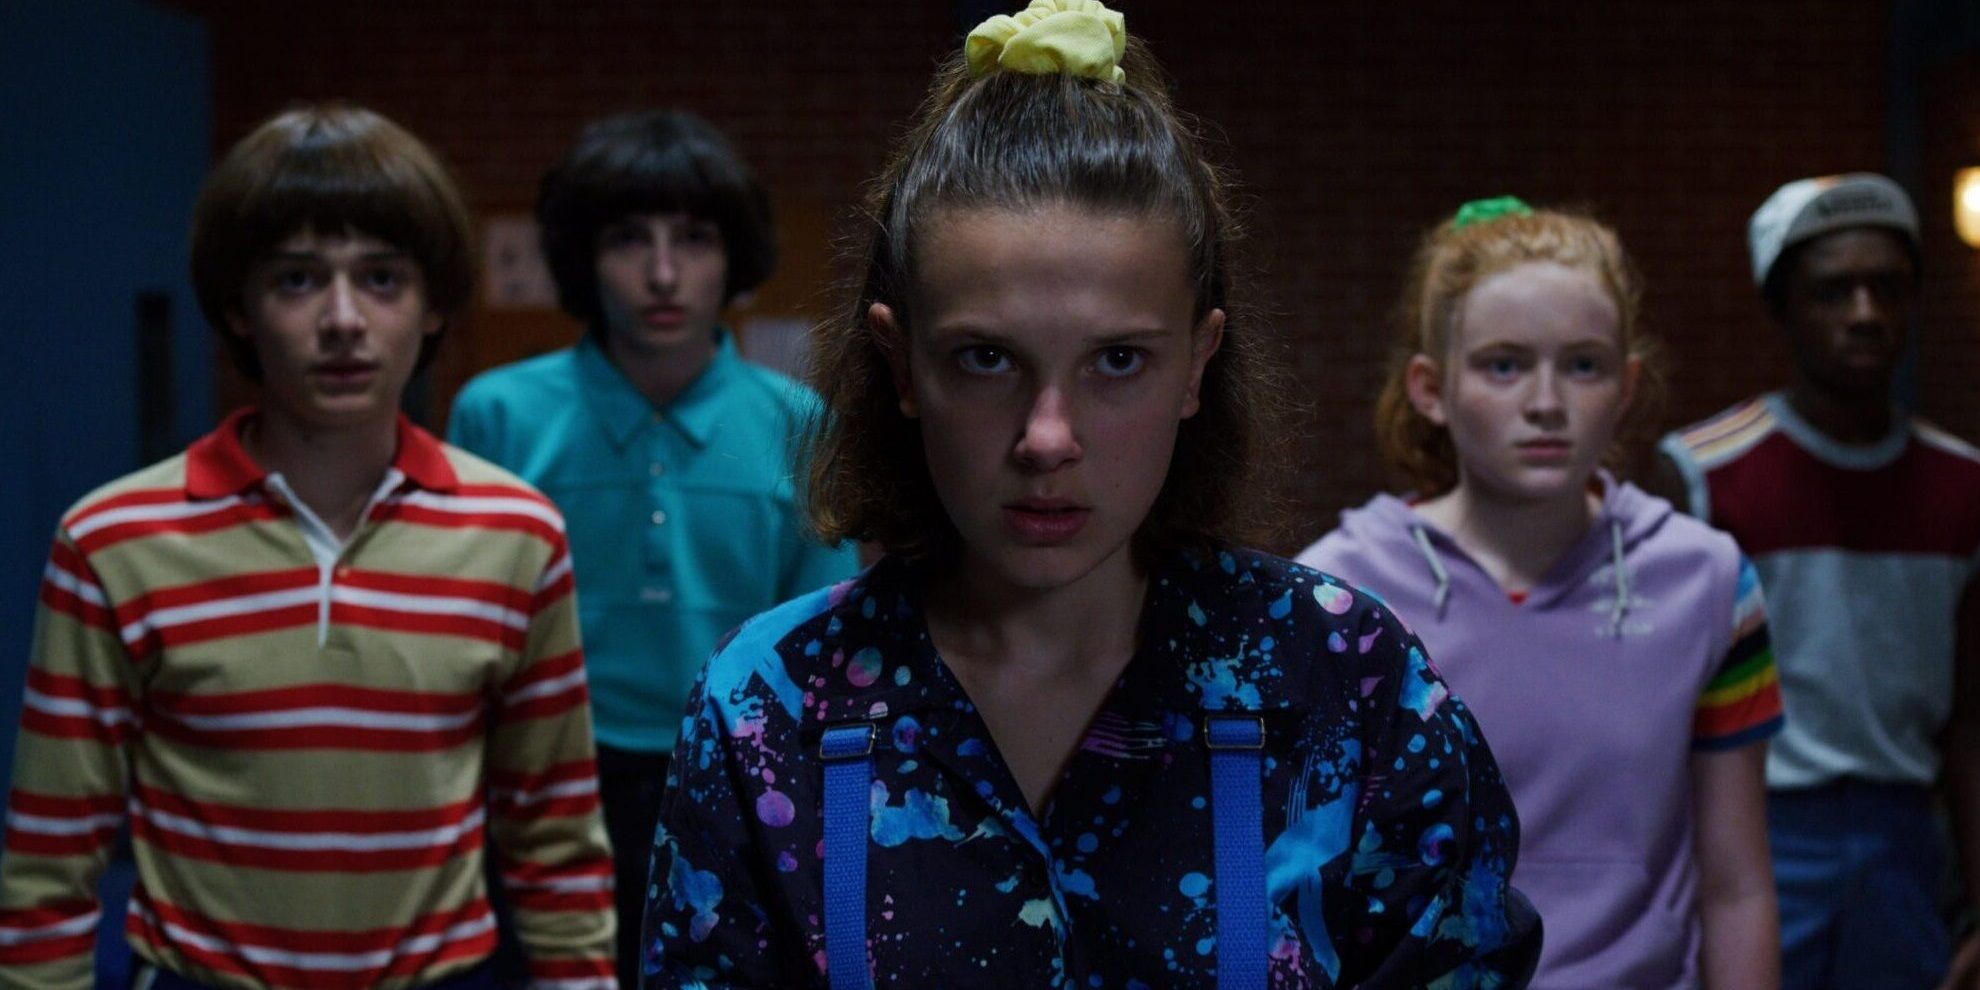 Stranger Things Animated Series: Everything We Know About The Netflix Spinoff